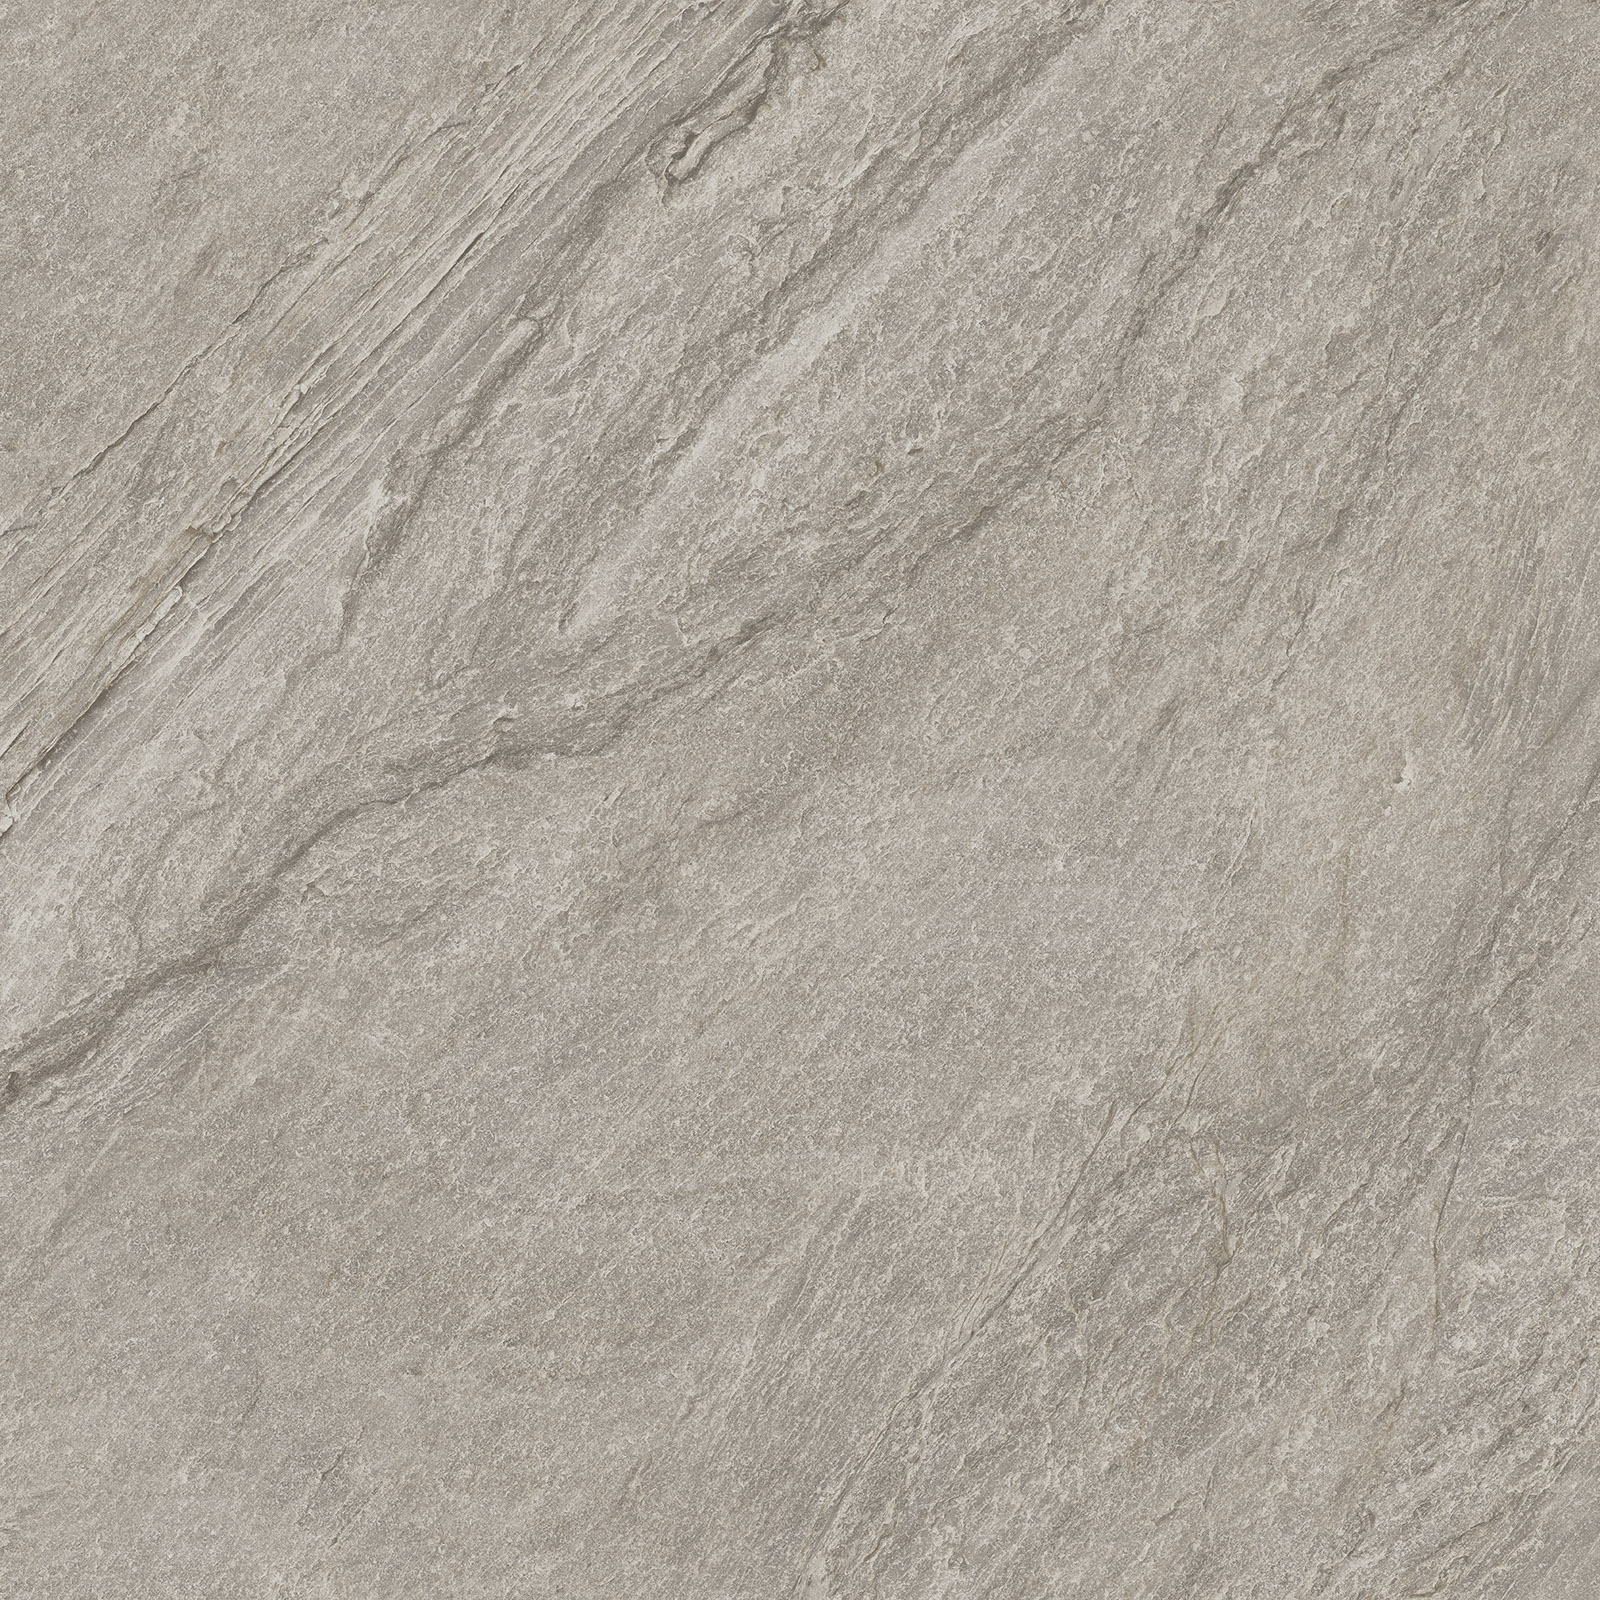 Imola Vibes Beige Scuro Natural Strutturato Matt 179401 90x90cm rectified 10mm - VIBES 90BS RM